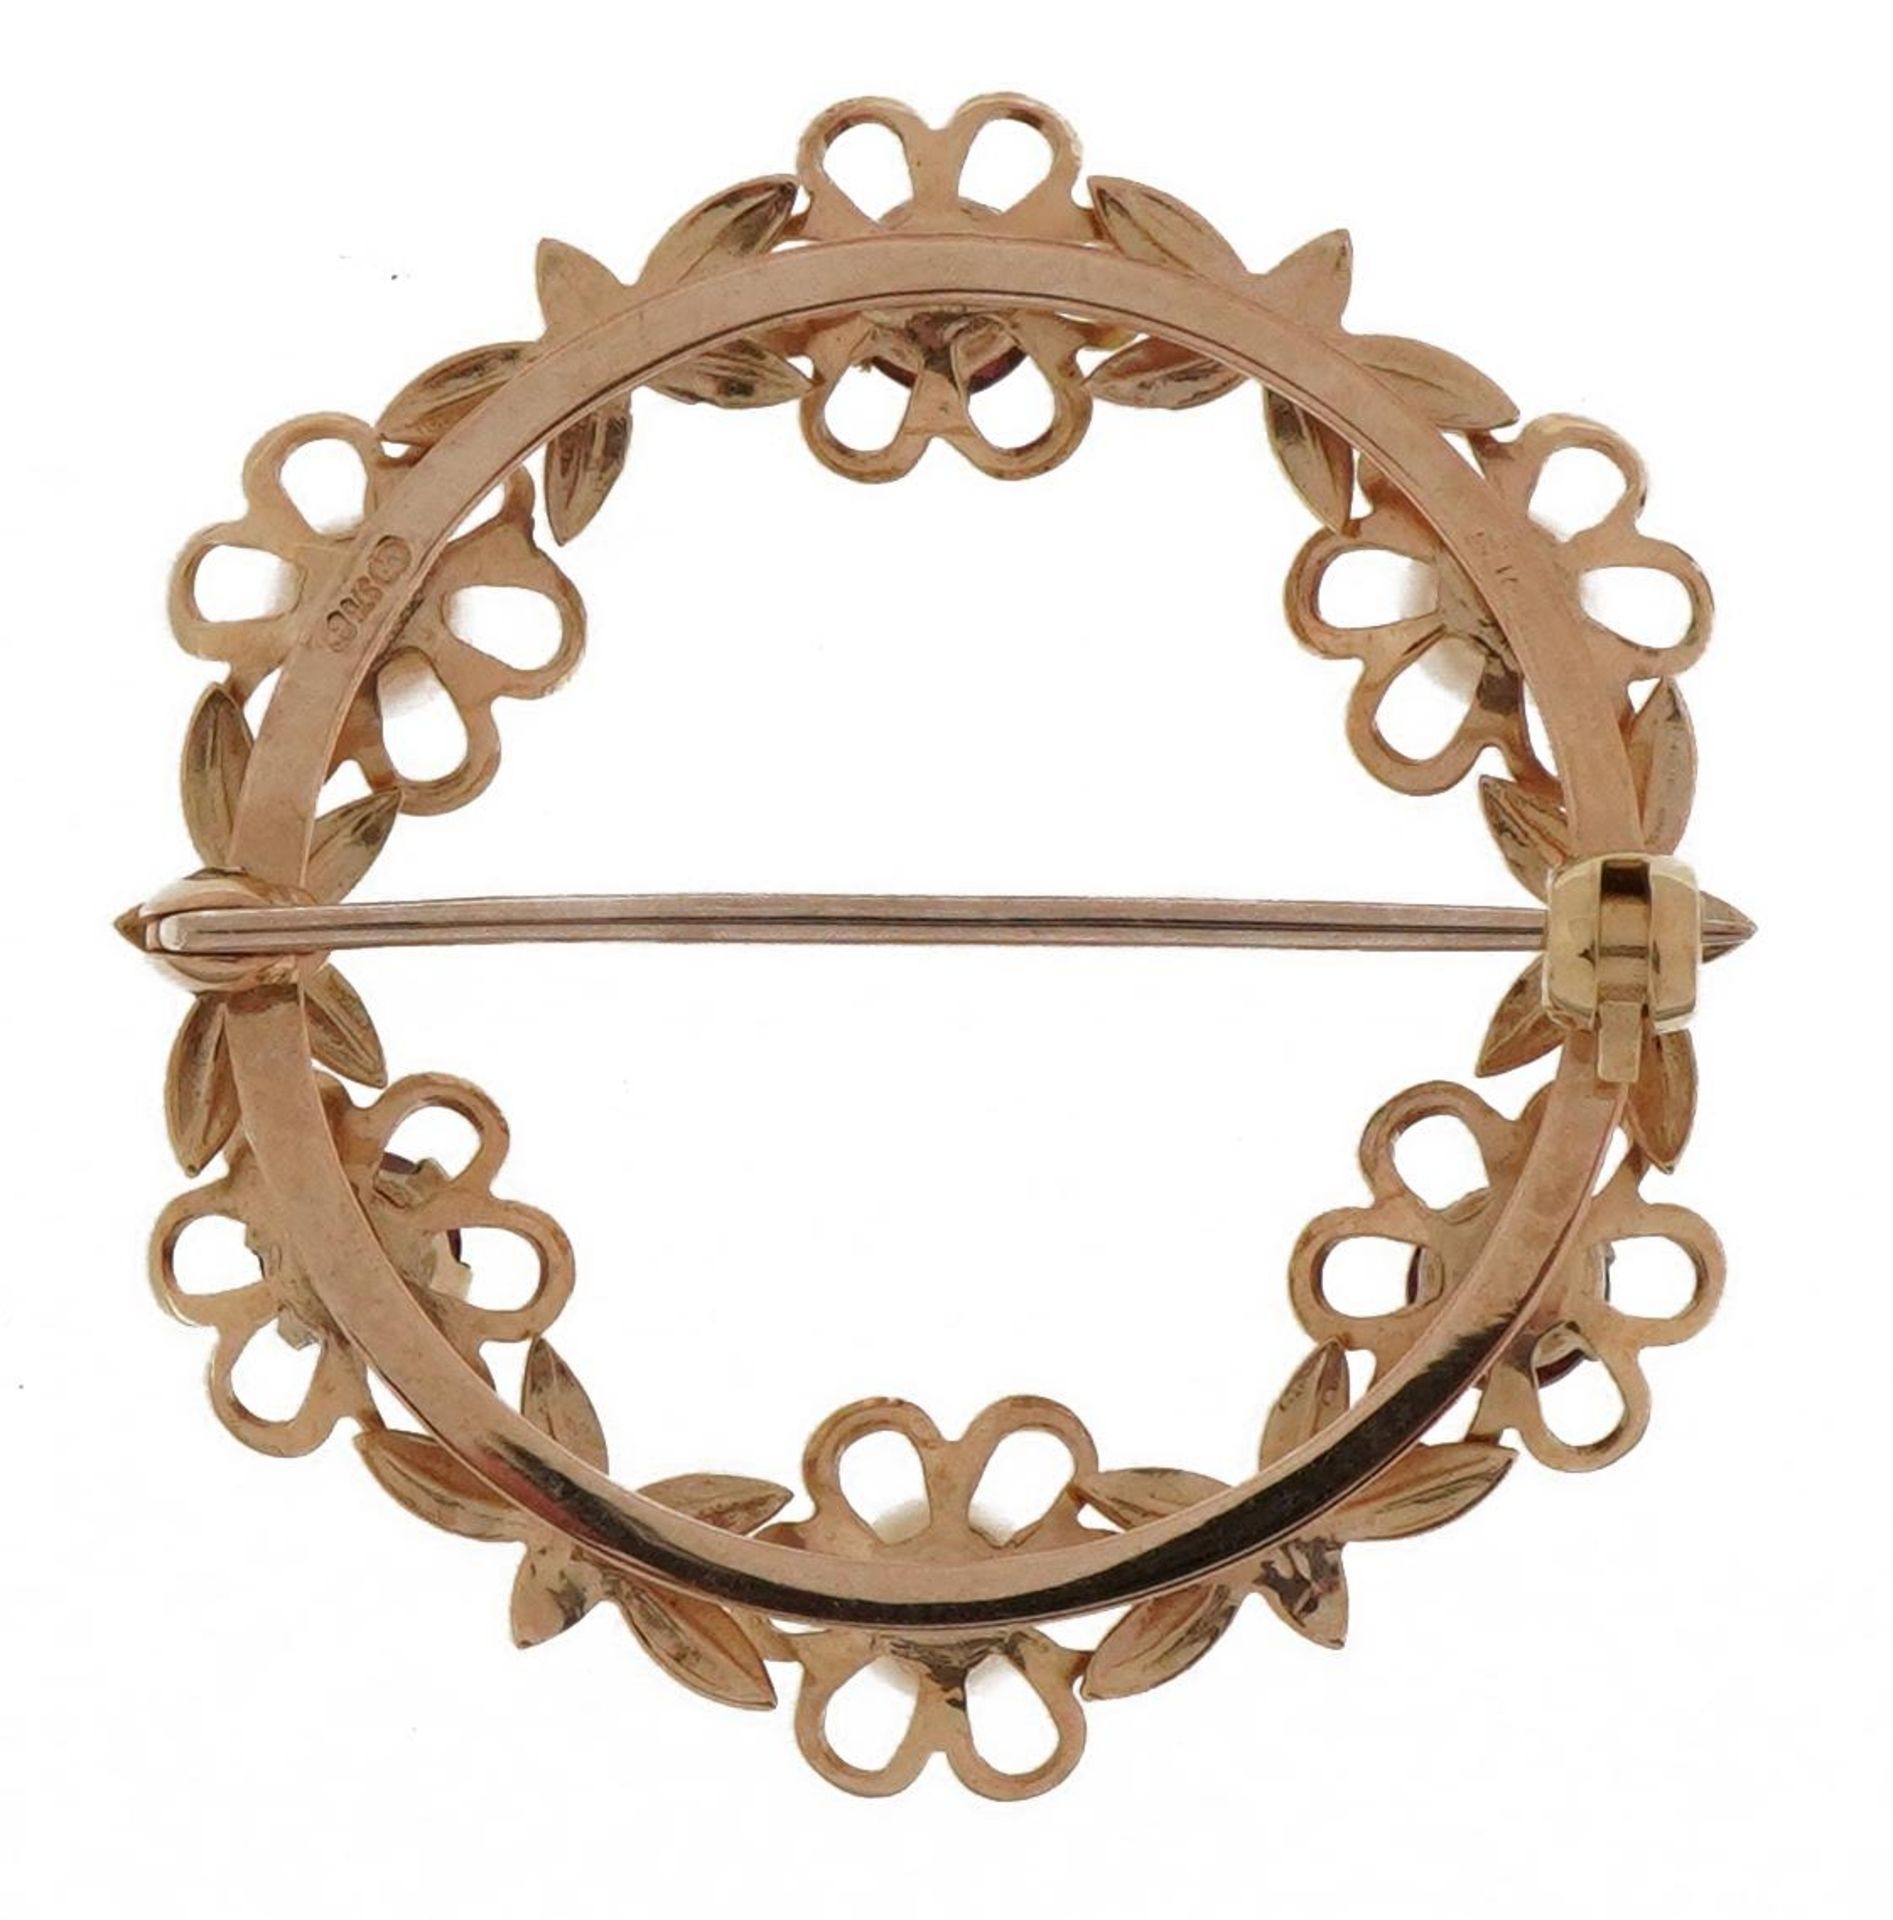 9ct gold garnet and pearl floral wreath brooch, 3.5cm in diameter, 4.3g - Image 2 of 3